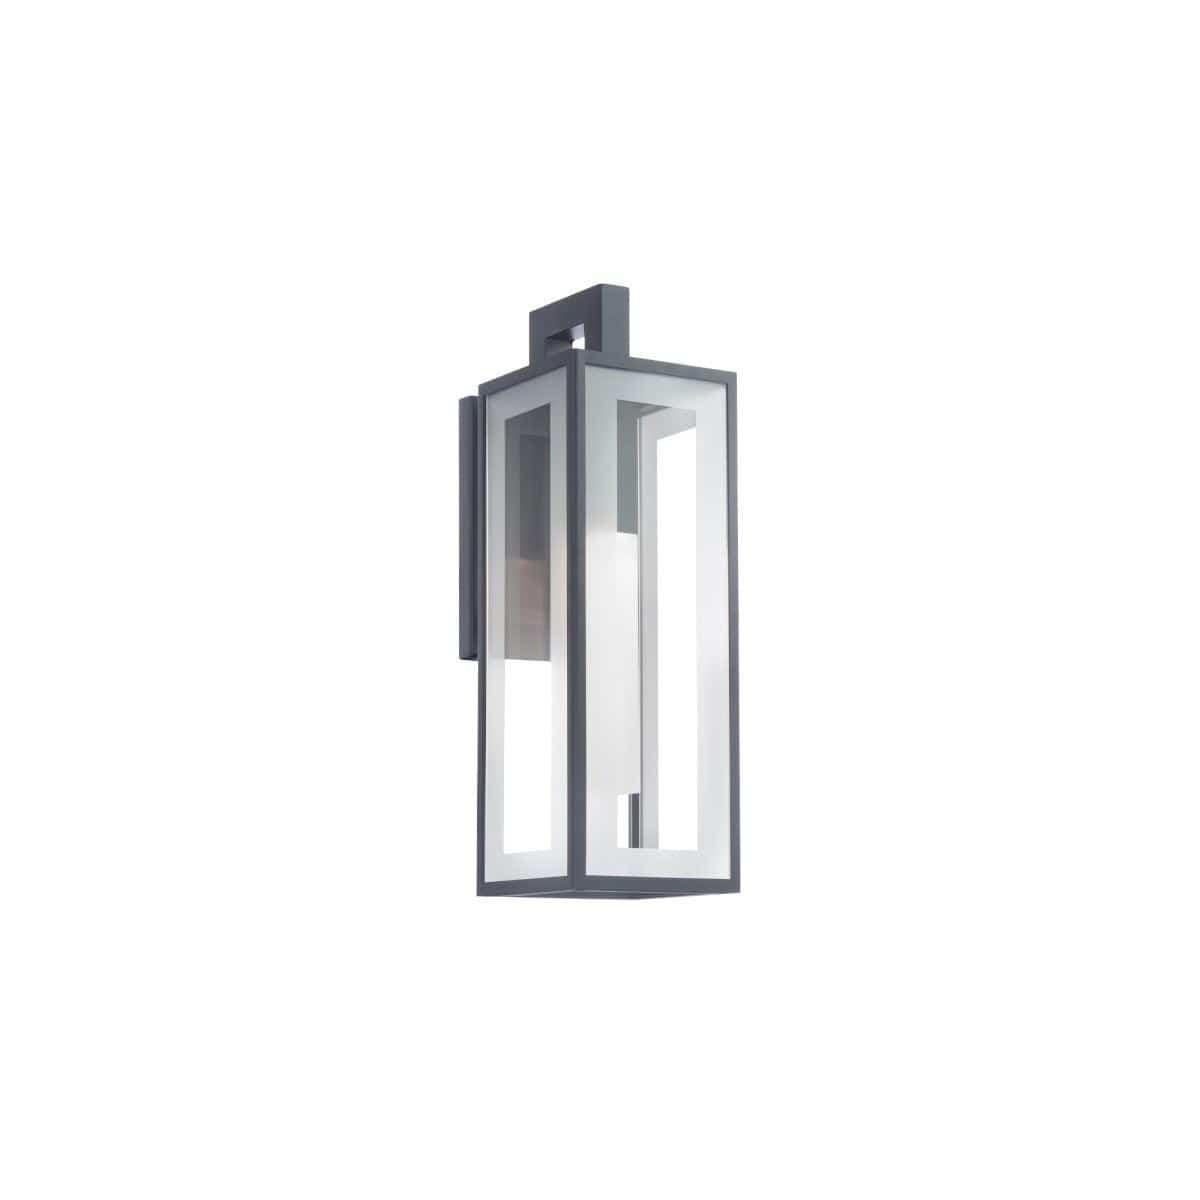 Modern Forms - Cambridge LED Outdoor Wall Sconce - WS-W24218-BK | Montreal Lighting & Hardware